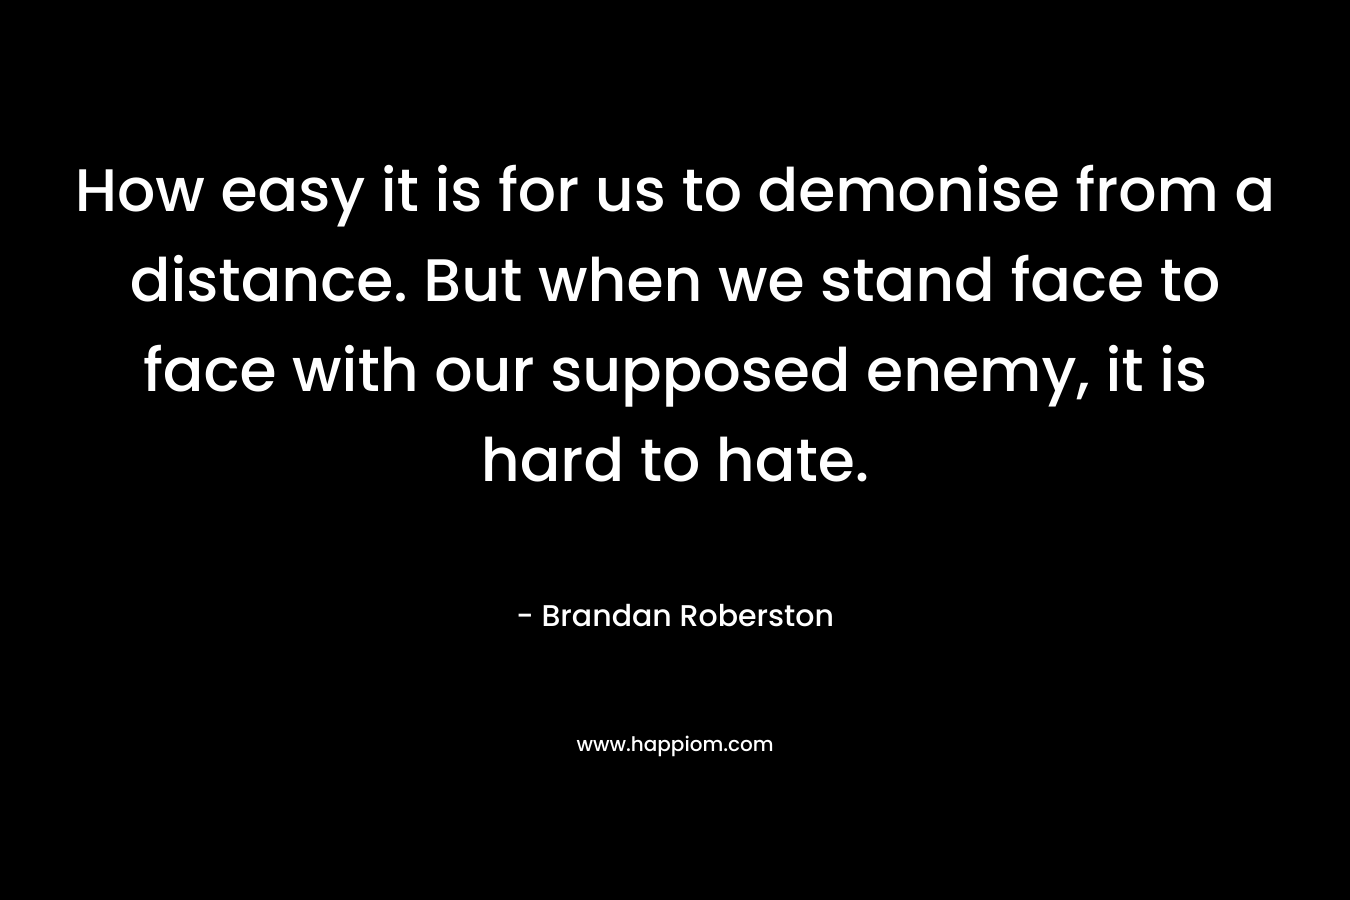 How easy it is for us to demonise from a distance. But when we stand face to face with our supposed enemy, it is hard to hate. – Brandan Roberston